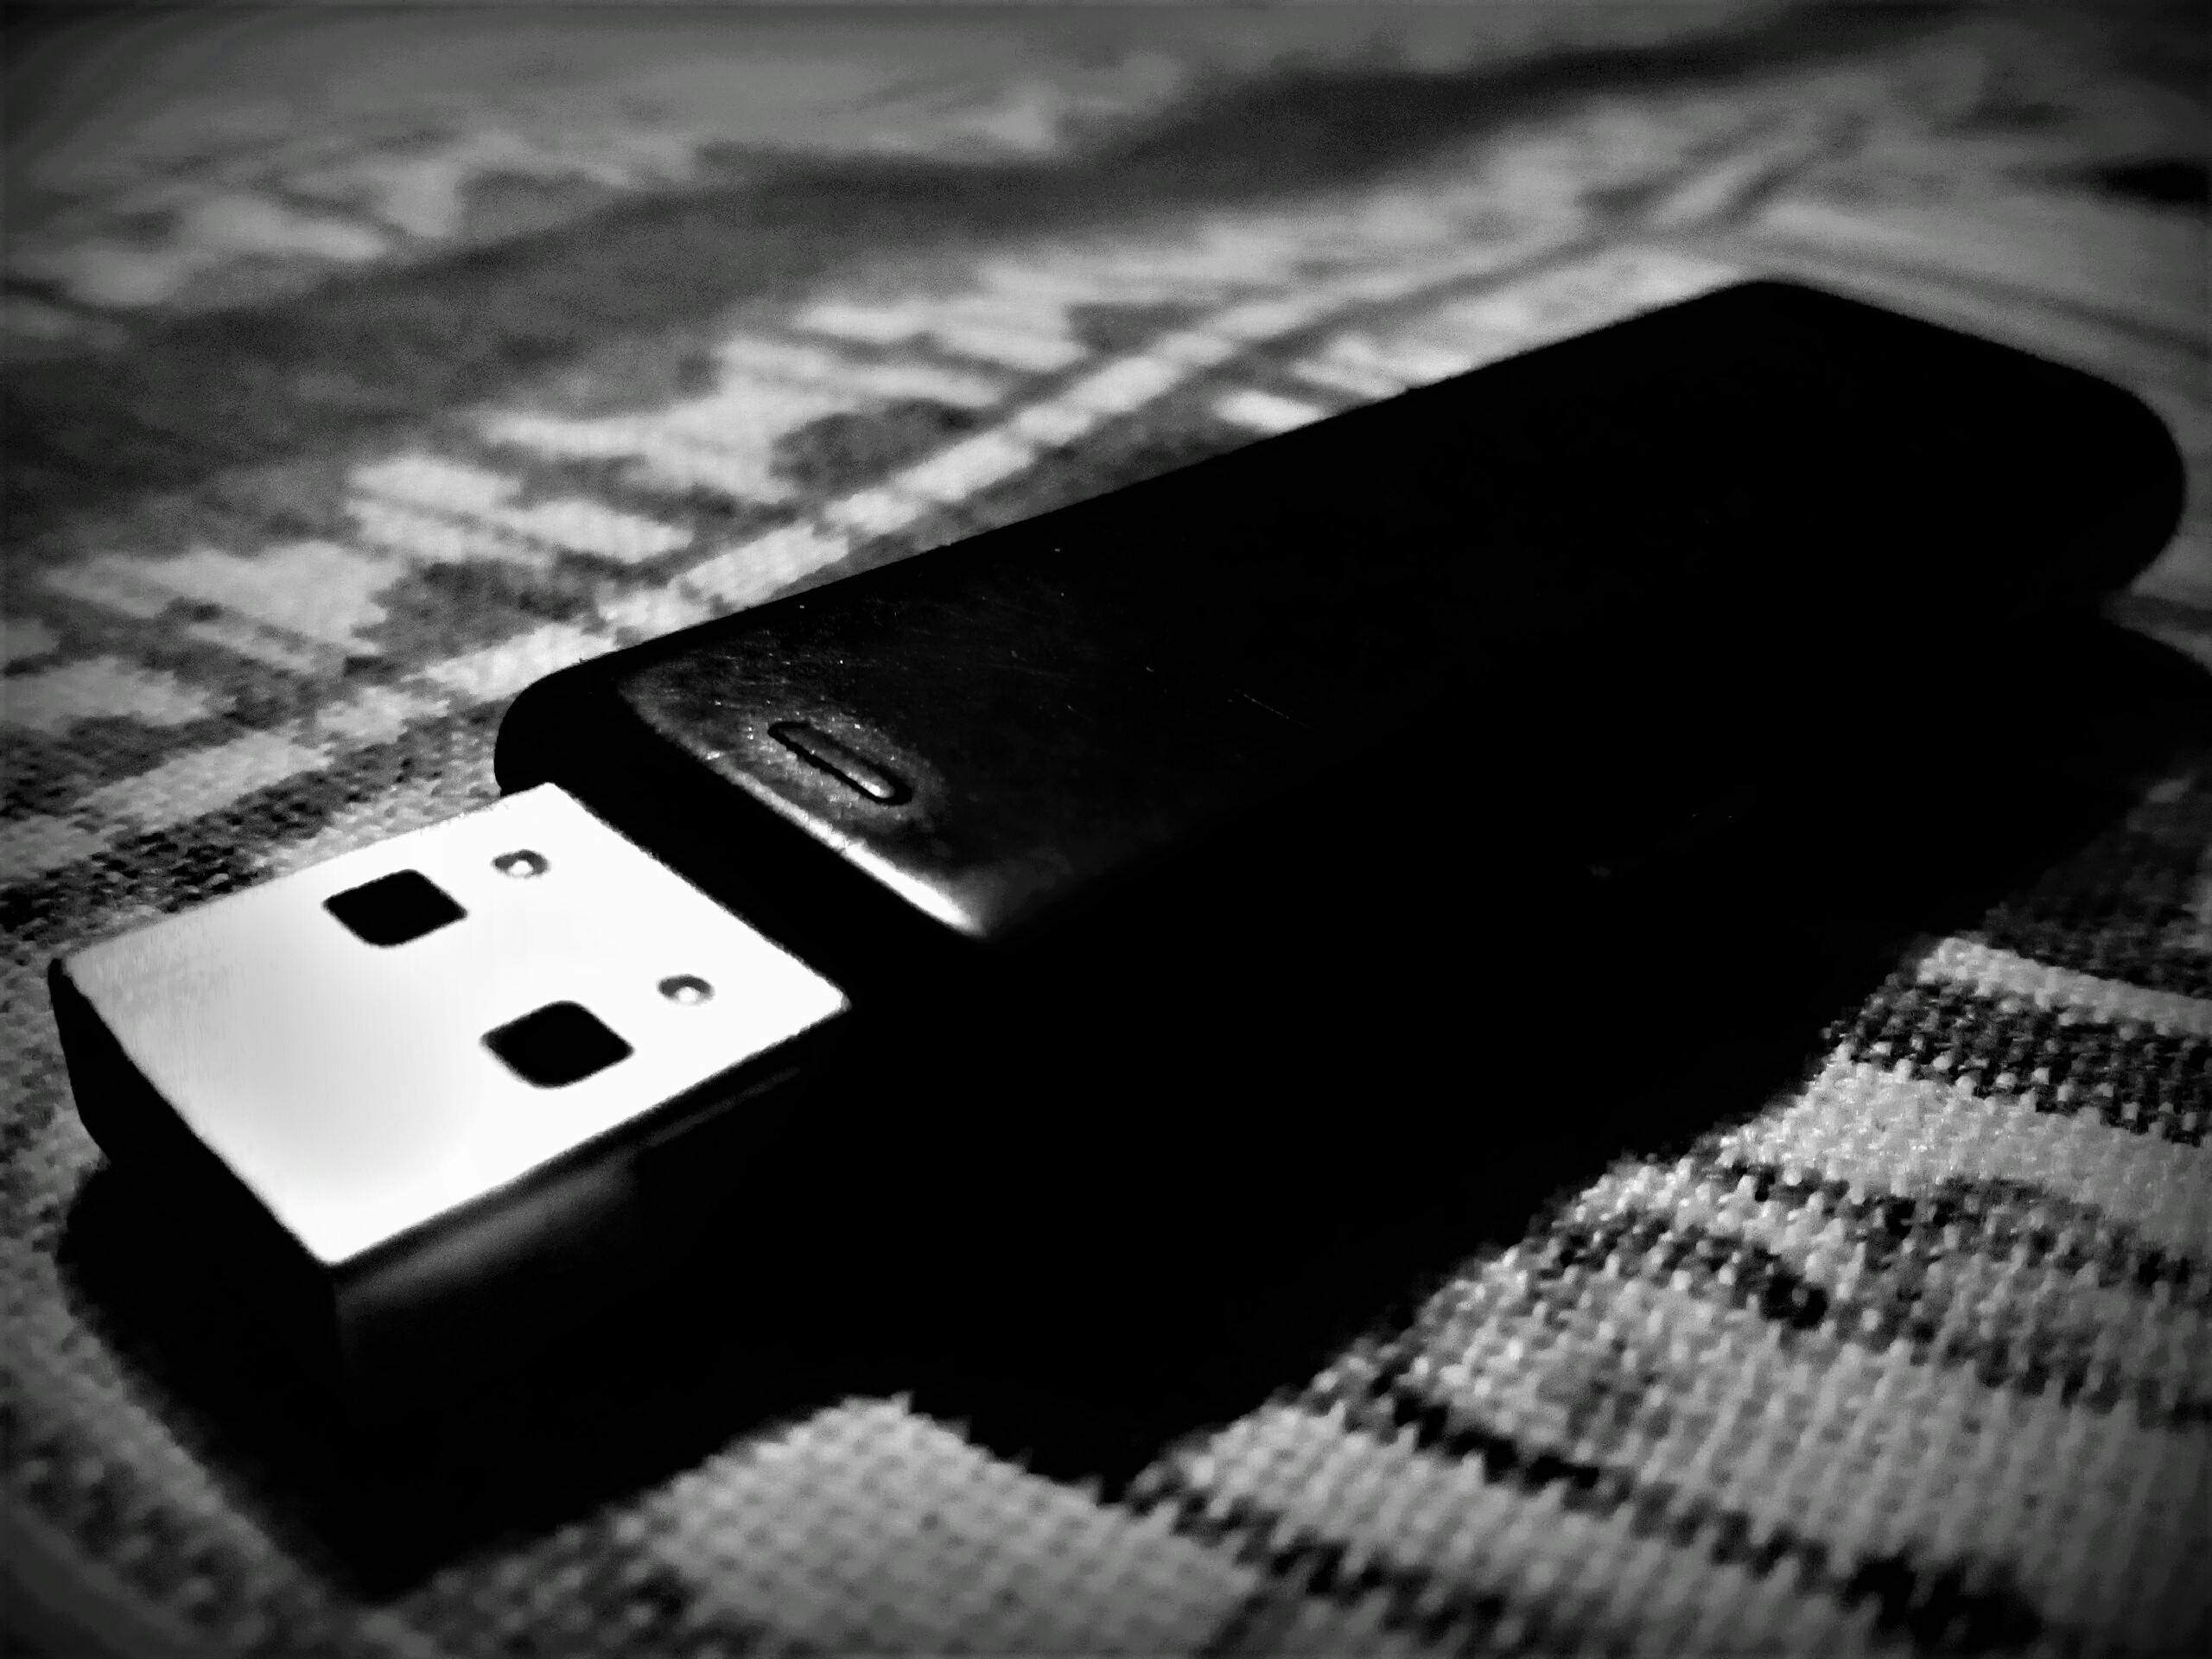 Free stock photo of black and white, bw, flash drive